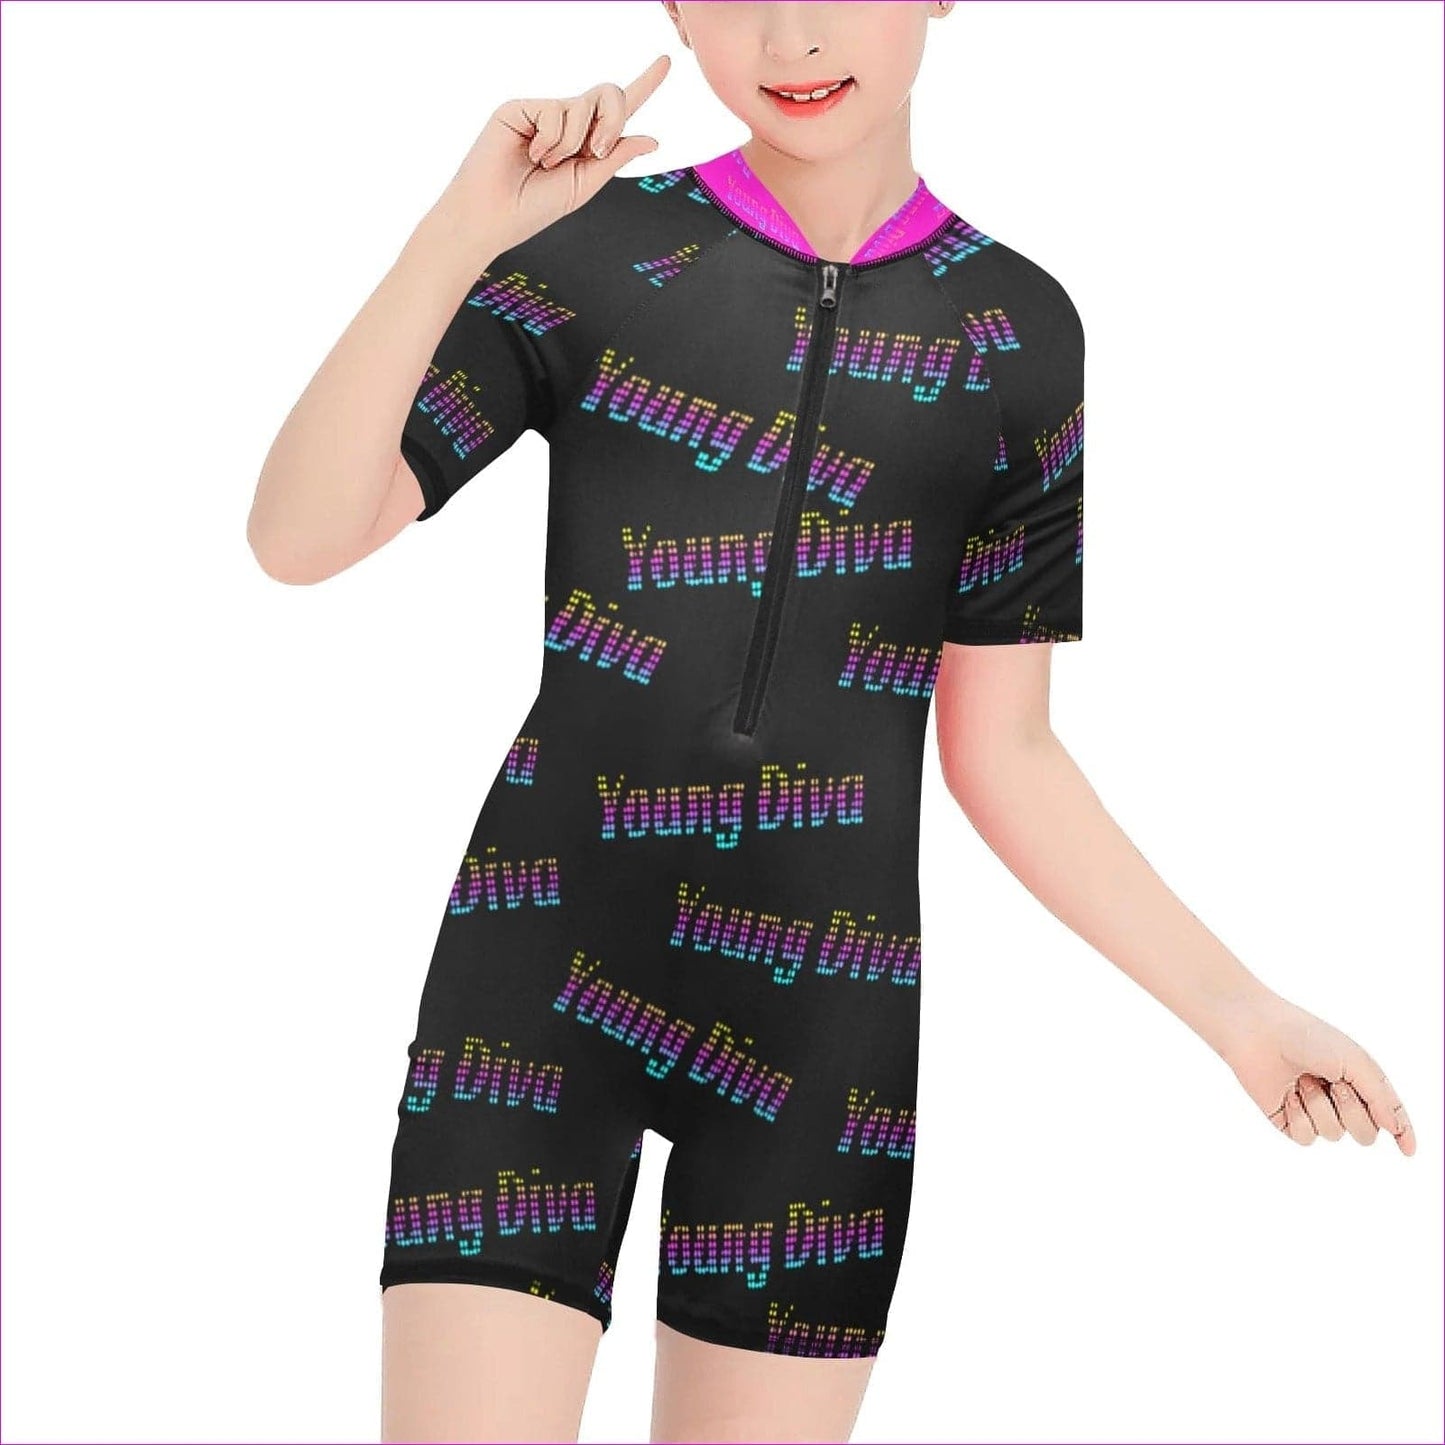 Young Diva Kids Short Sleeve One-Piece Swimsuit - kid's swimsuit at TFC&H Co.